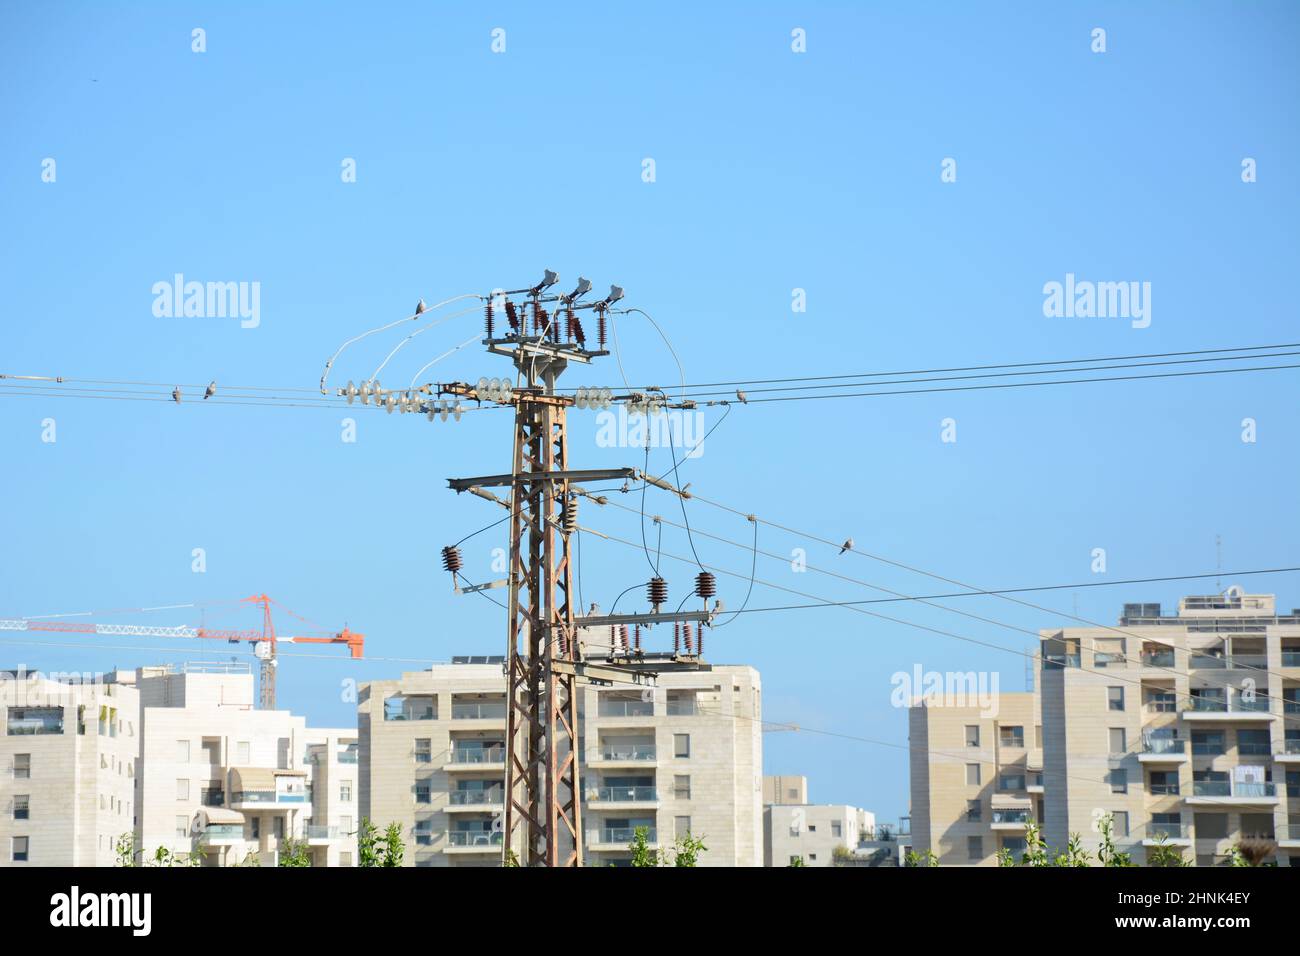 Low angle close-up view of the top part of an electricity distribution pylon and power lines under blue sky Stock Photo